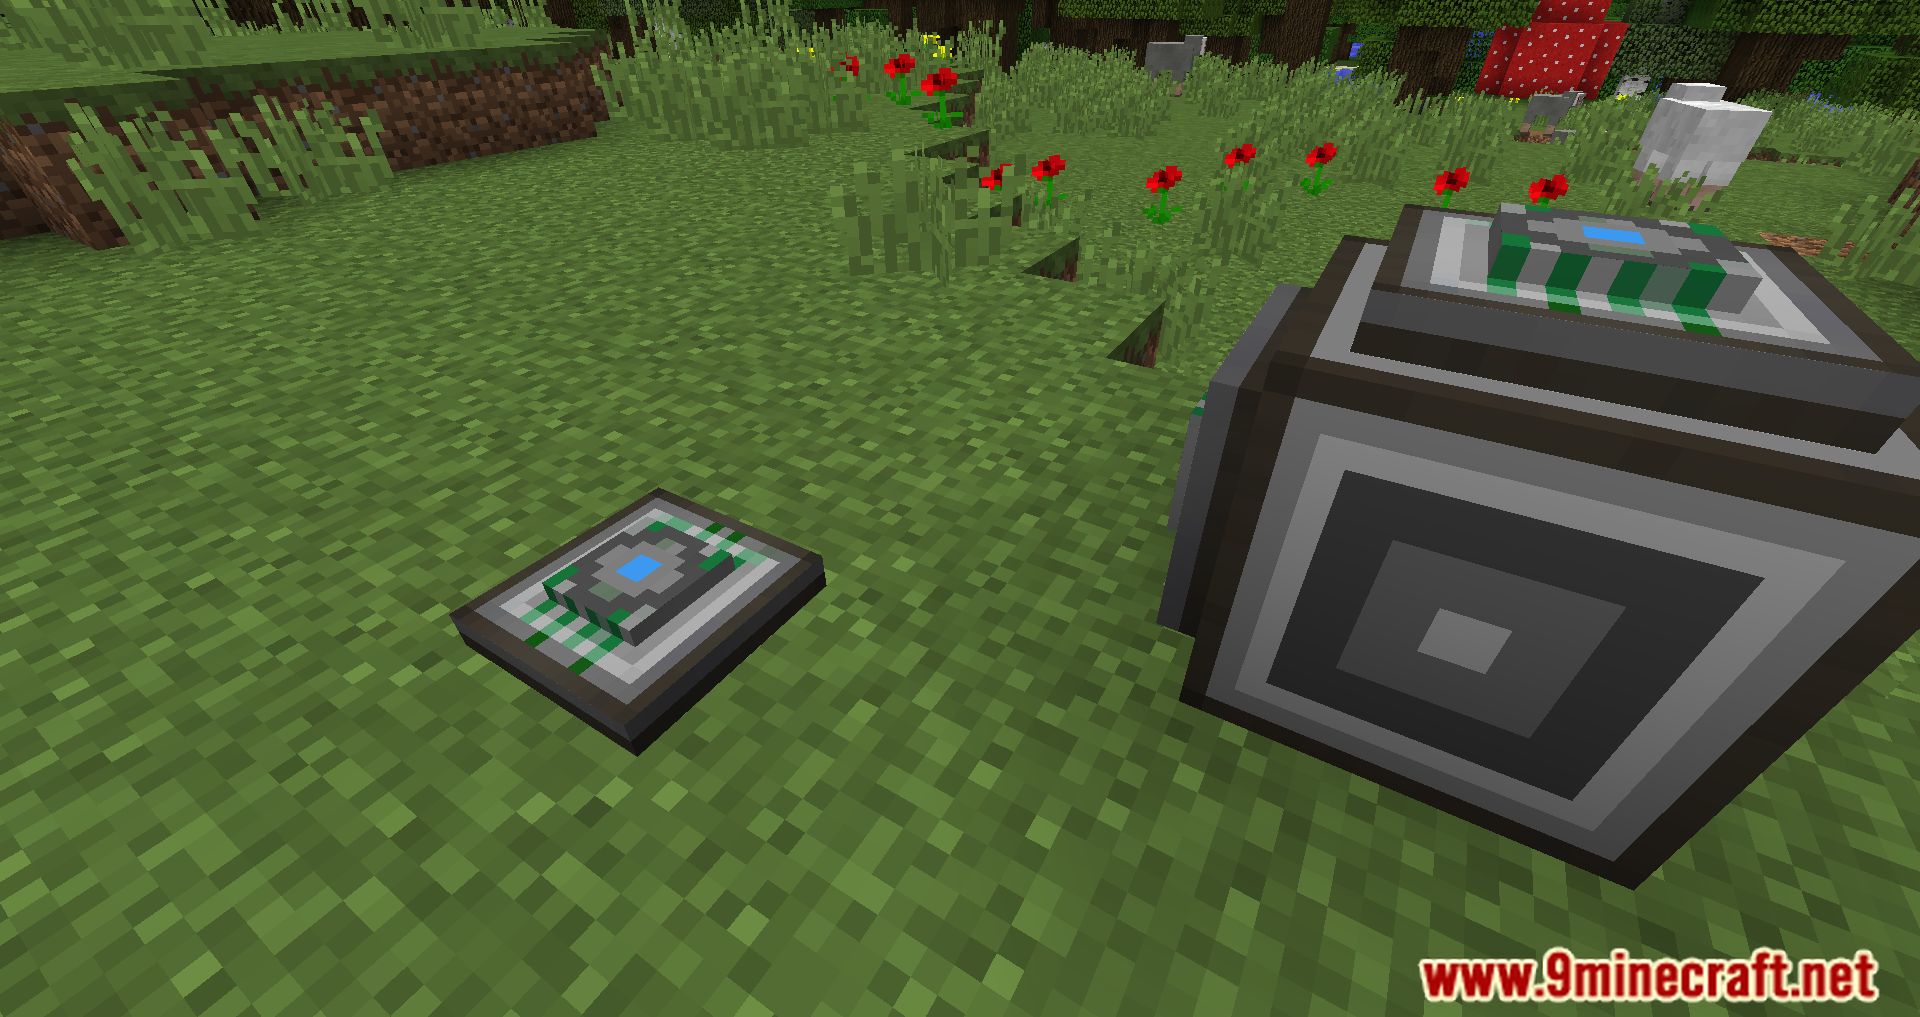 ME Capability Adapter Mod (1.12.2) - Allows Applied Energistics Connections Over Things 4